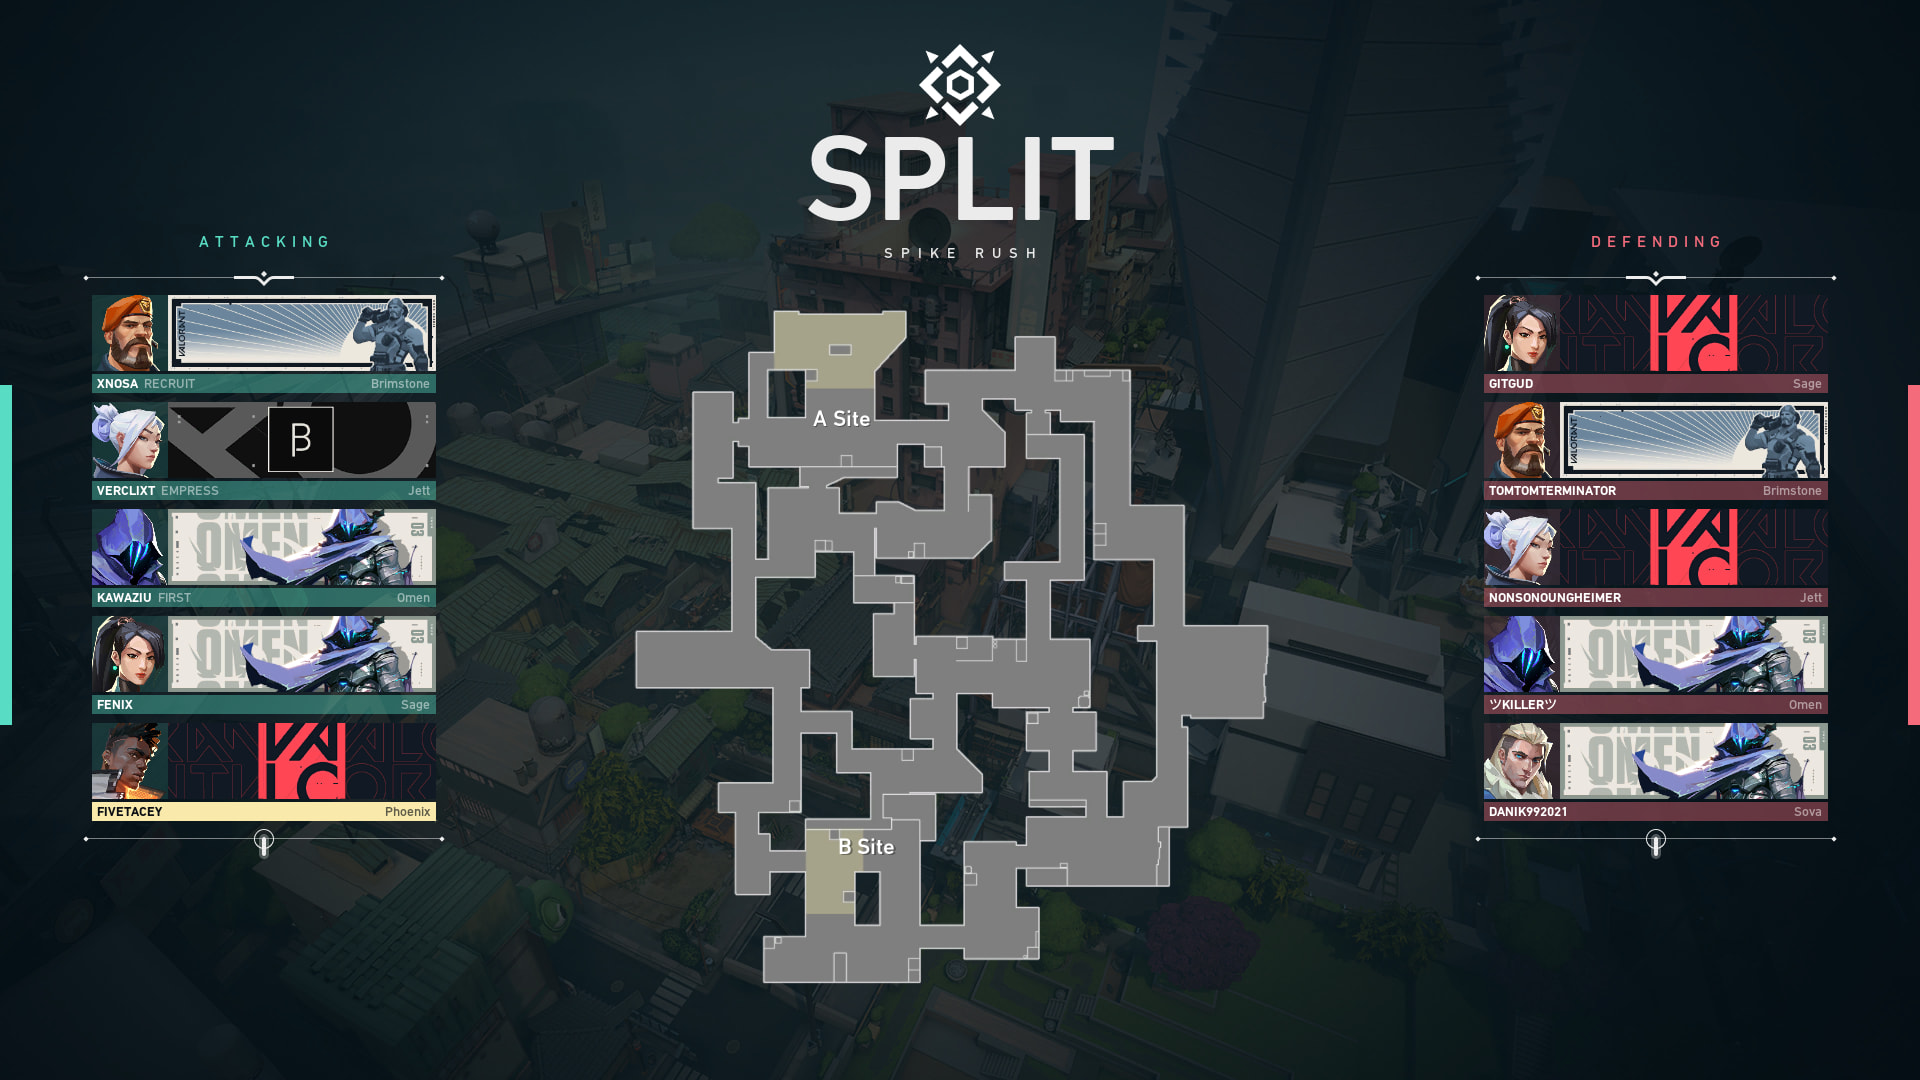 How to Attack and Defend on Split - VALORANT Map Guide